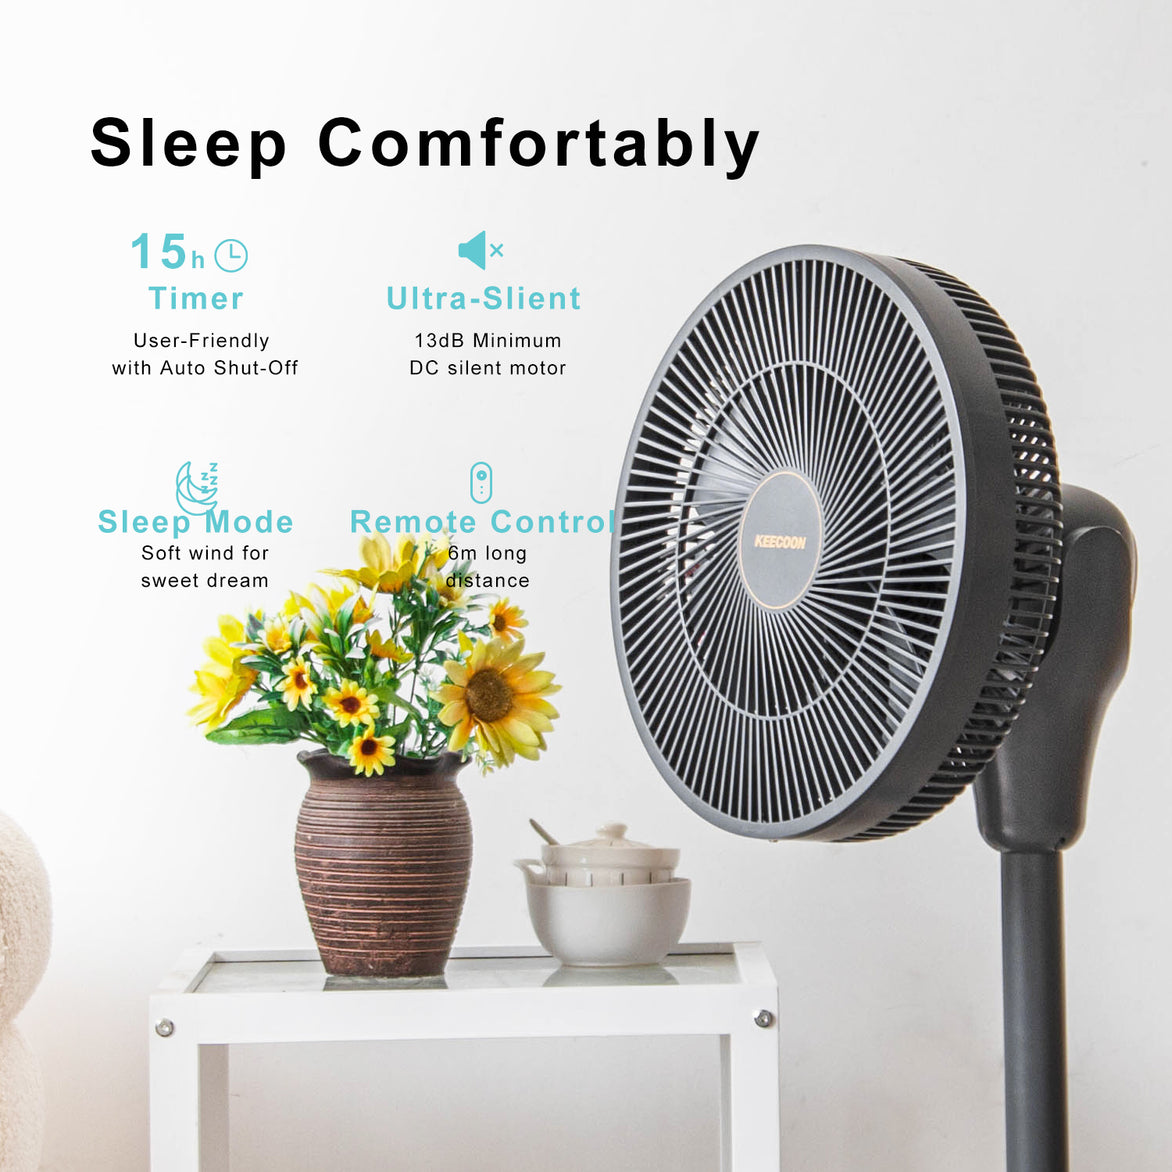 Standing Fan for Patios Home, 360 Degree Oscillating Rechargeable Pedestal Fan with Remote, 37-Inch Tall Cordless Whole House Style Portable Fan, Quiet,15000mAh Battery, 15 Speed Levels&Timer, Gray